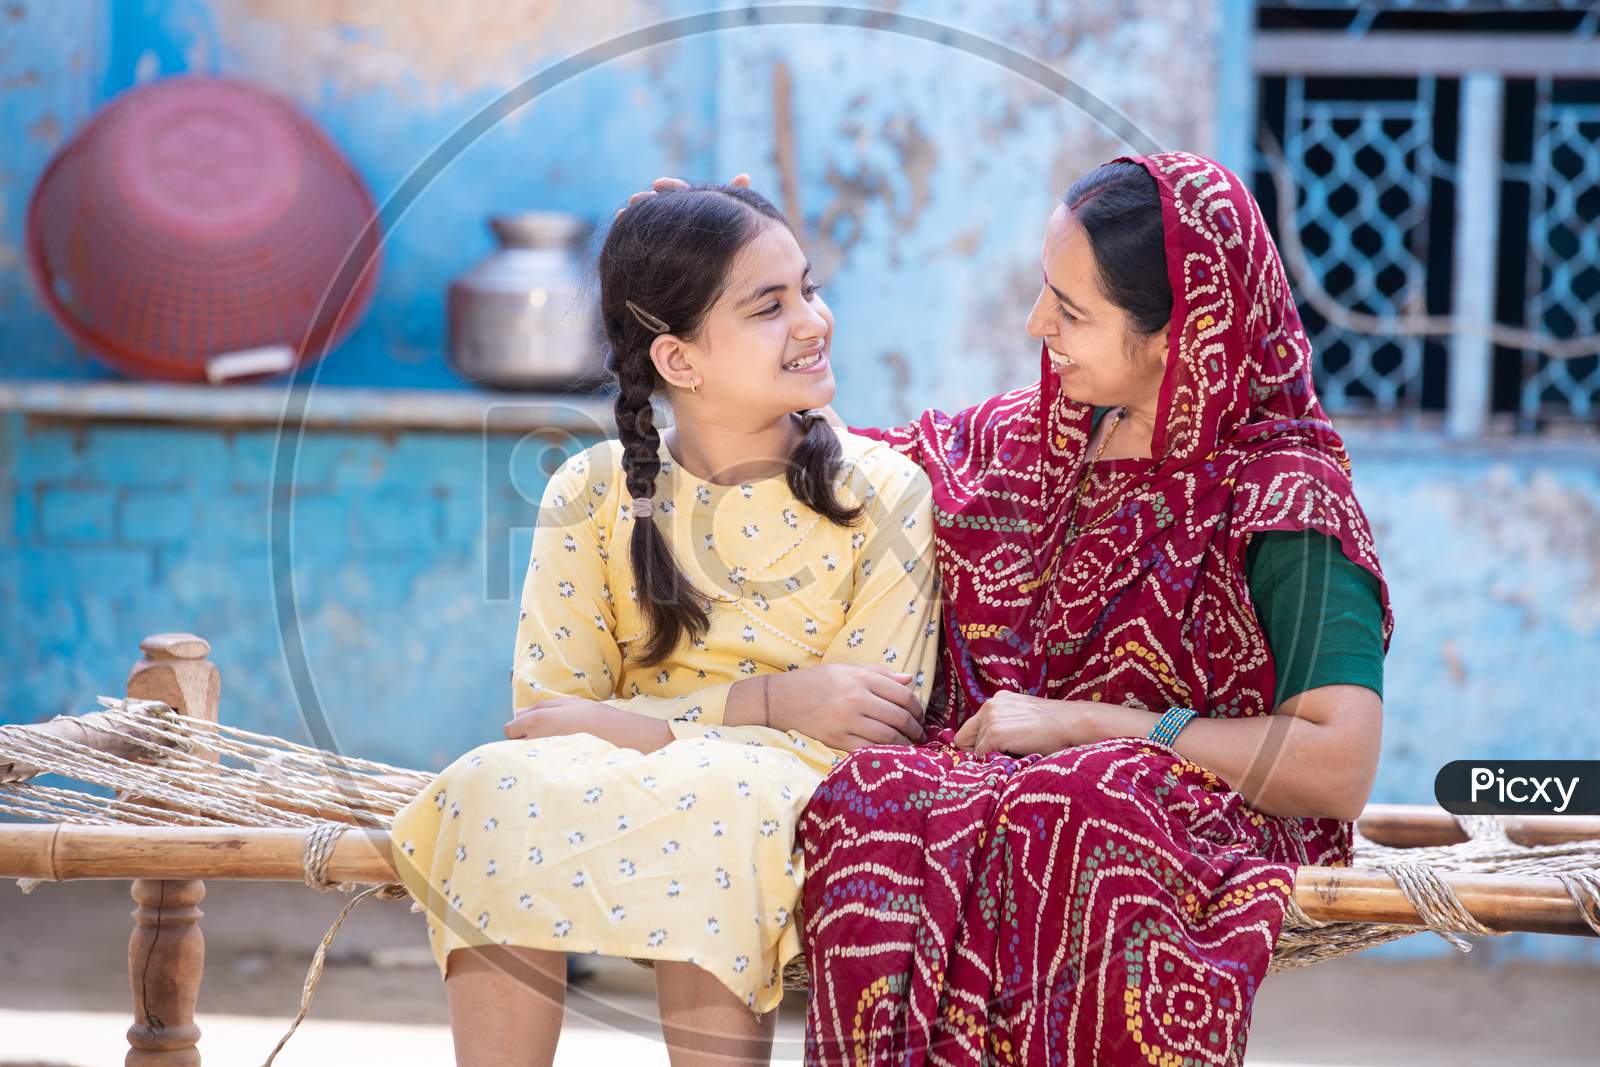 Smiling Young Indian Mother And Adorable Little Daughter Having A Good Time Together, Sitting On Traditional Bed, Cute Child Girl In Braided Hair And Mum In Red Sari Looking At Each Other.